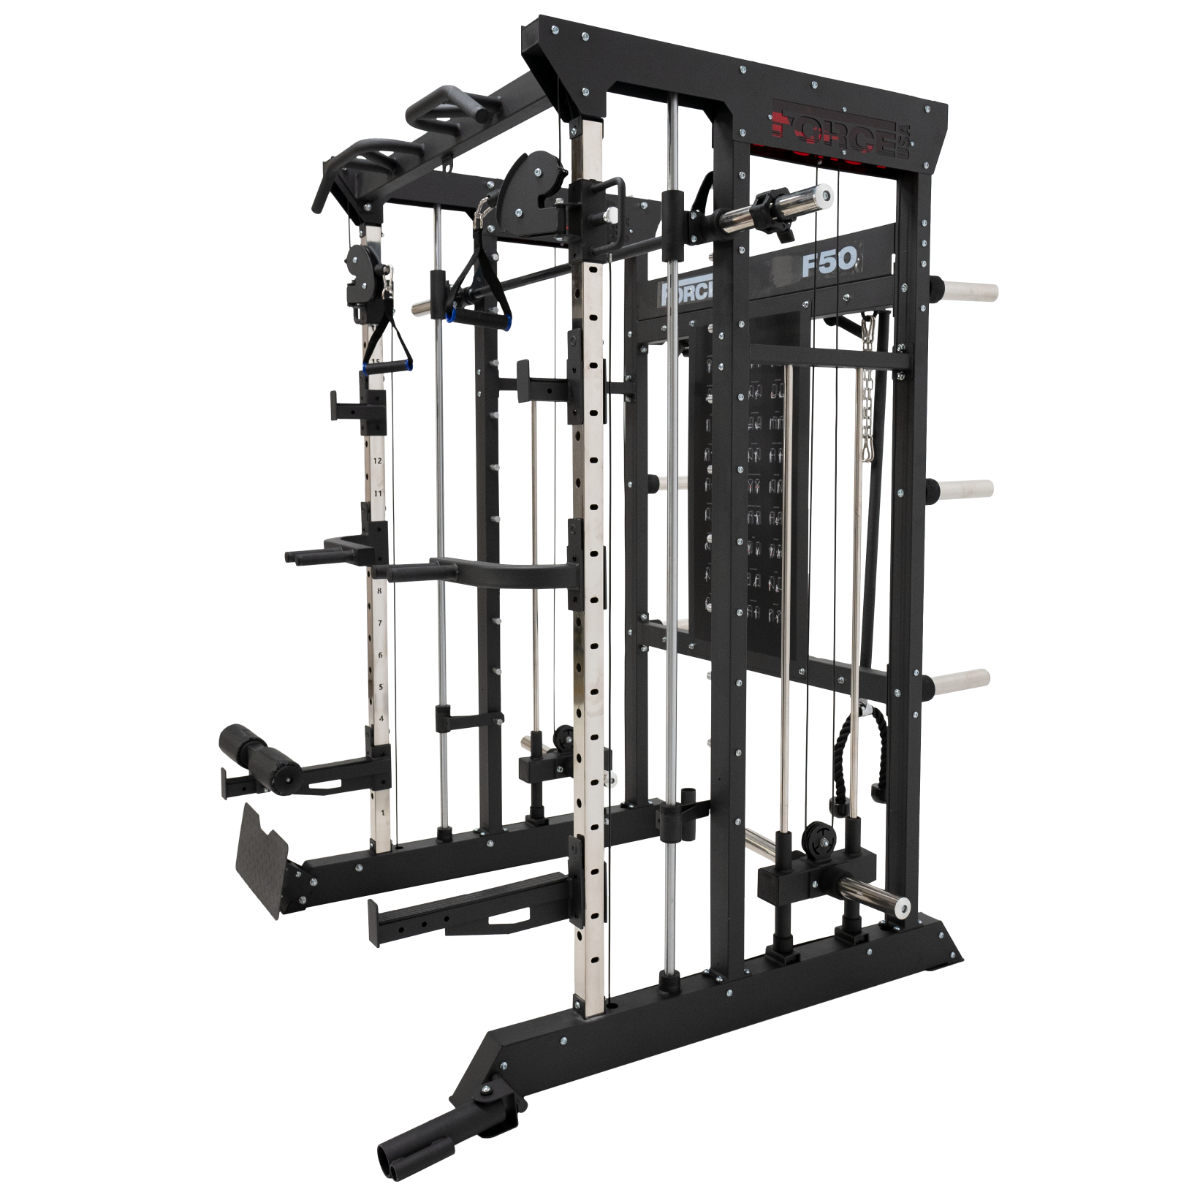 Force USA F50 V2 - Todo en uno Functional Trainer 